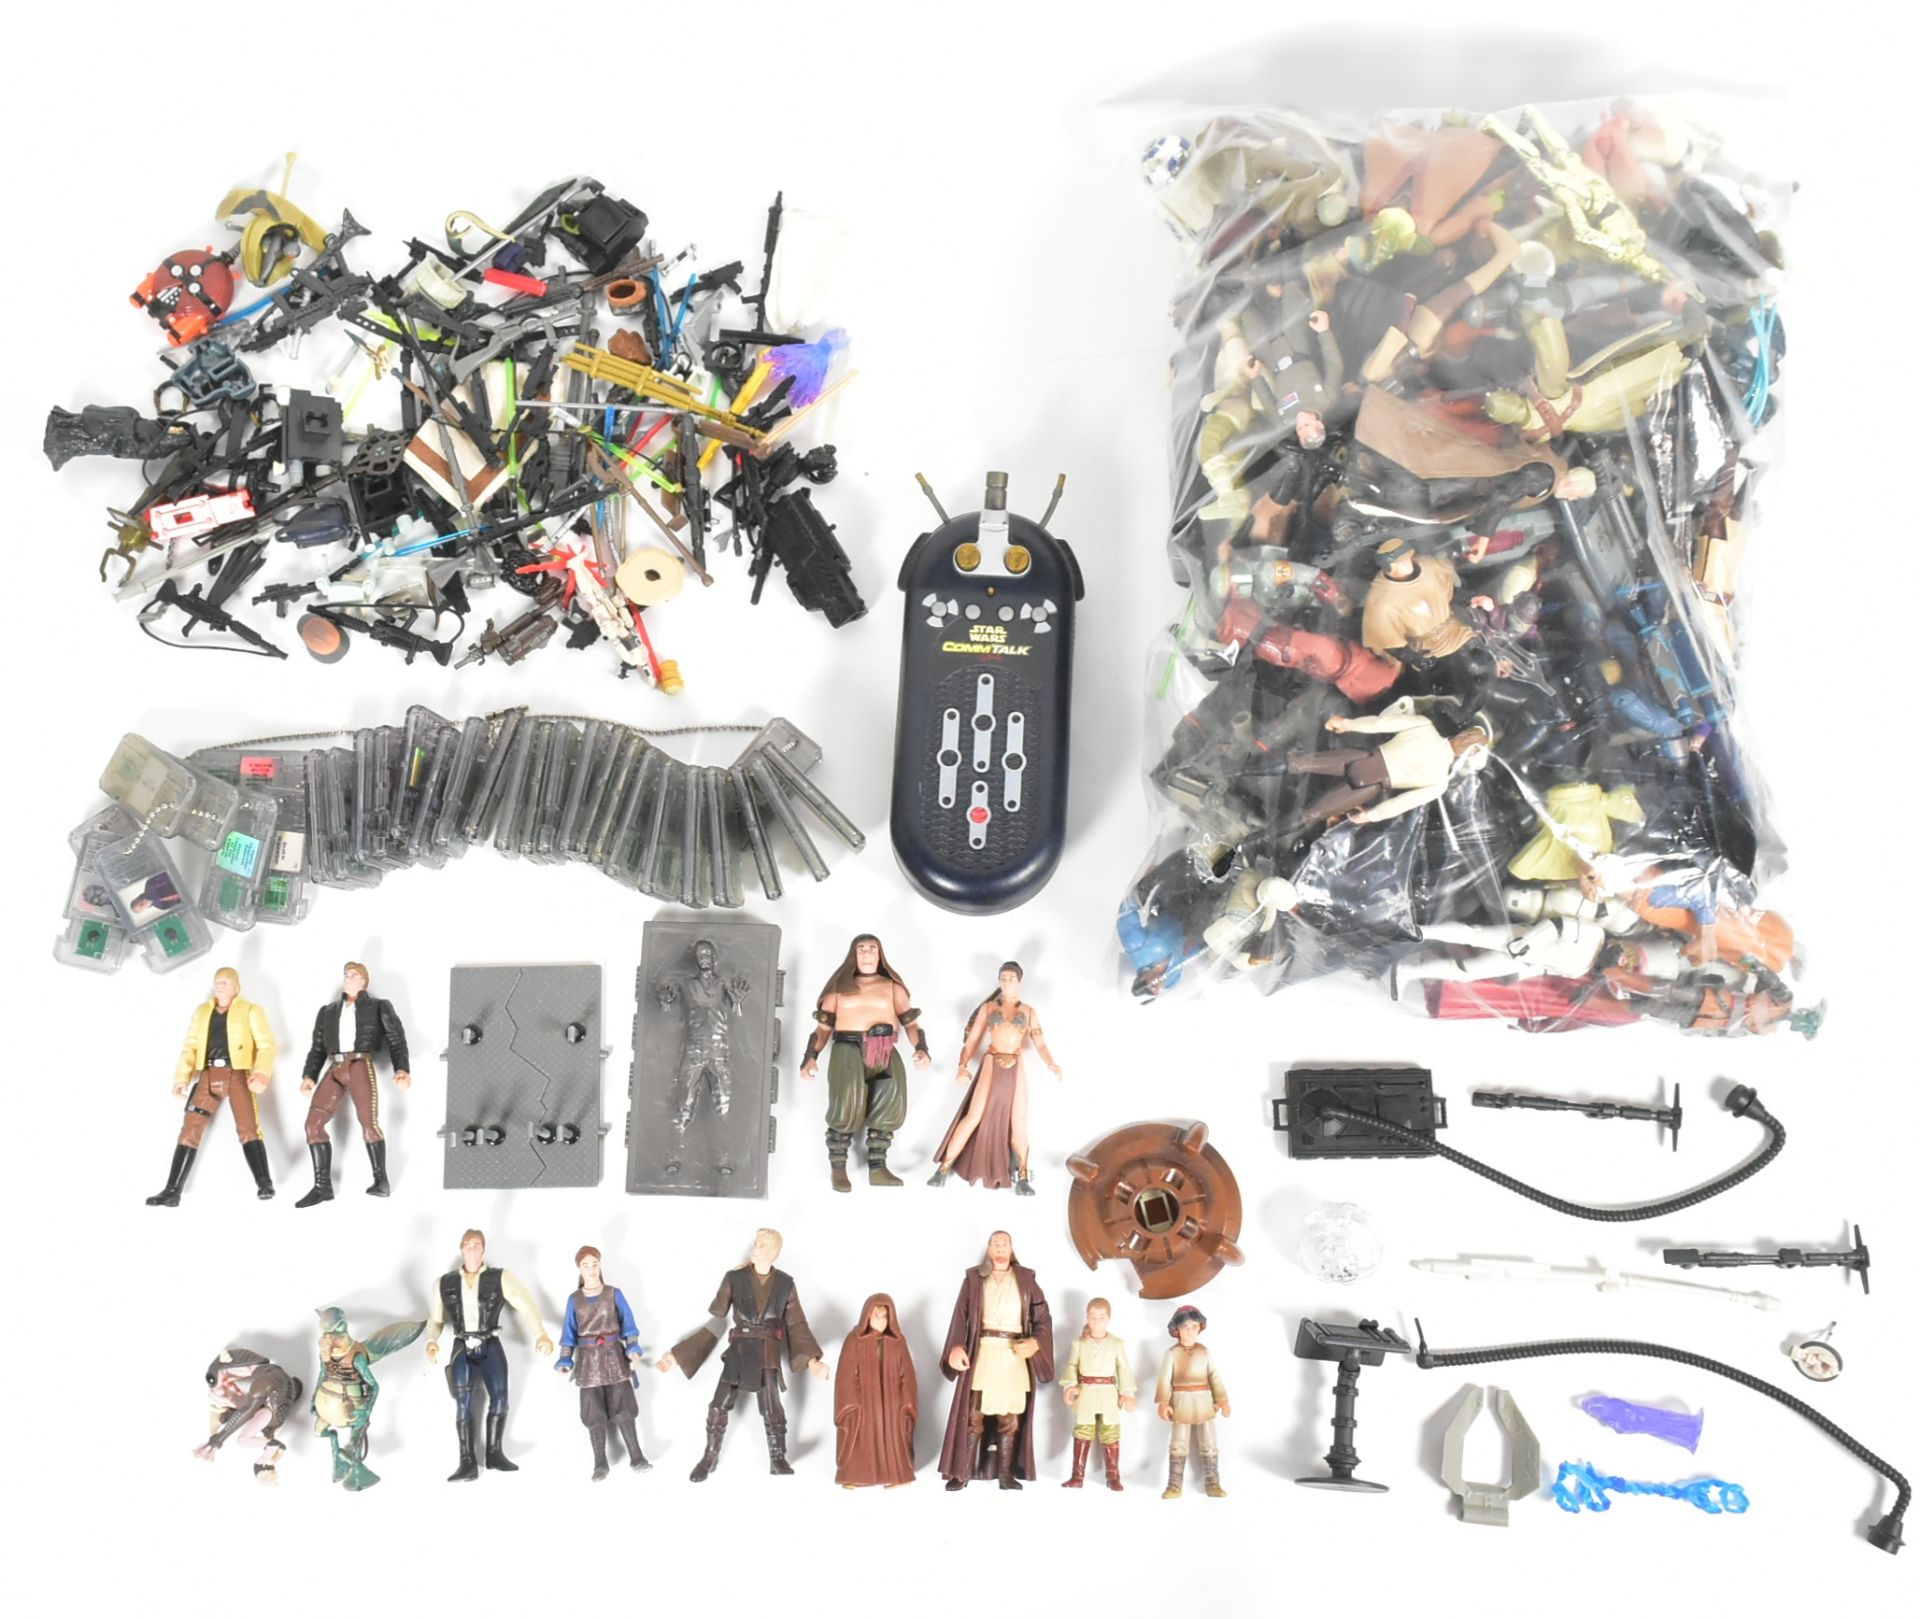 STAR WARS - LARGE COLLECTION OF 1990S ACTION FIGURES